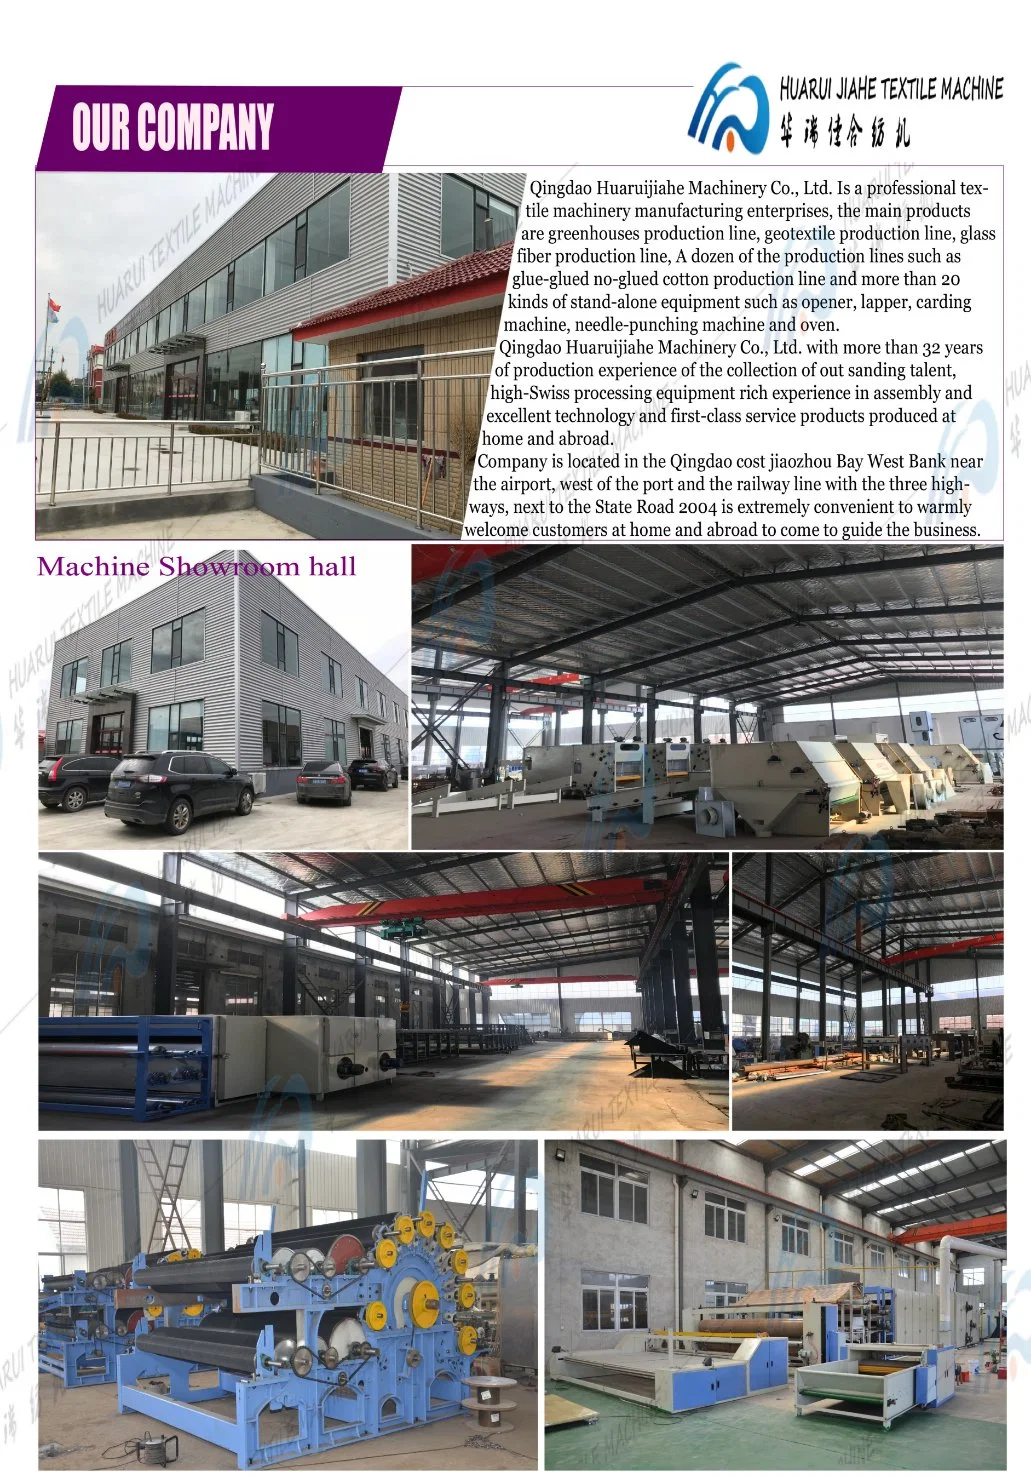 Raschel Acrylic Fibers Woolen Blanket Printing and Dying Machine, Laschel Blanket, Russel Cotton Blanket Carpet After Finish Machinery with Washing Machine